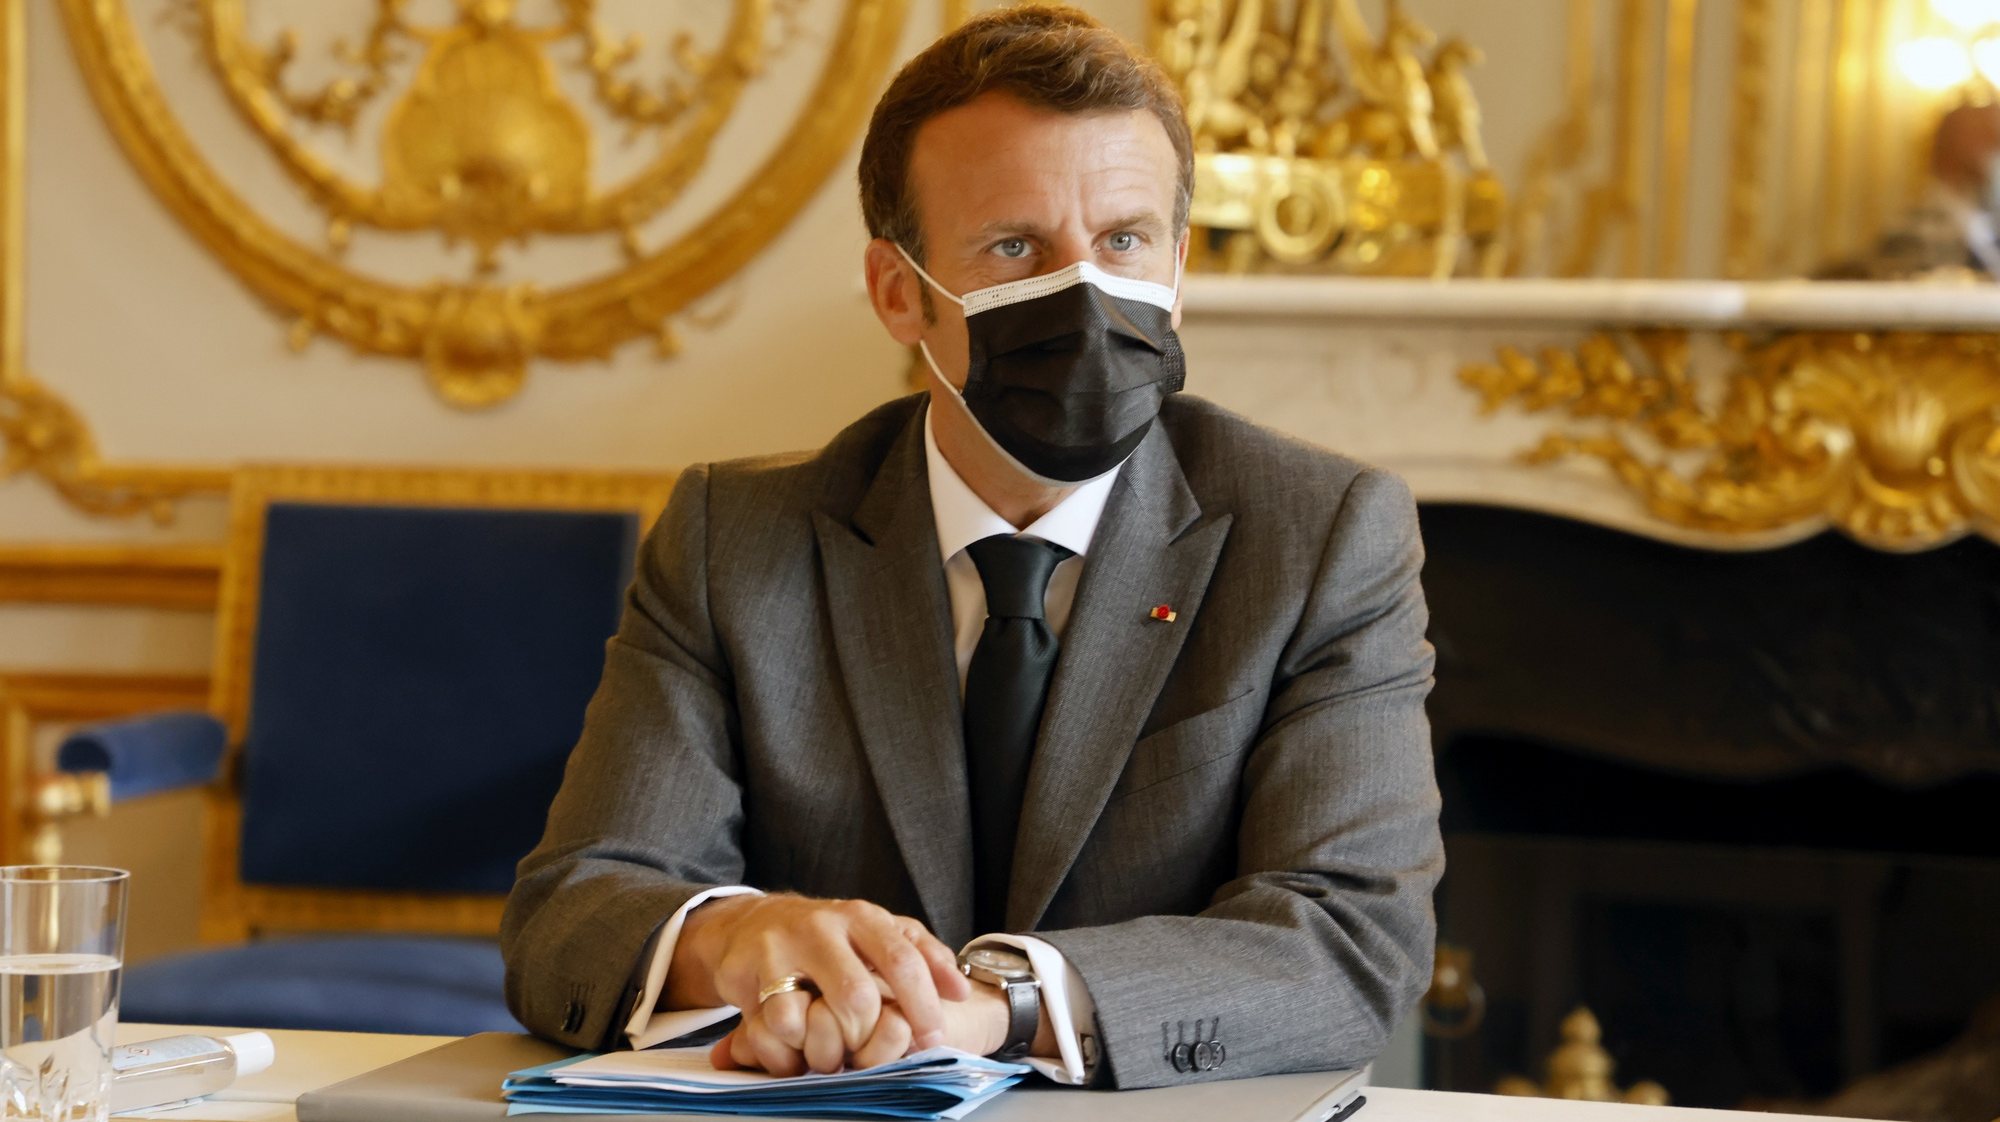 epa09290079 French President Emmanuel Macron attends a meeting with nightclubs owners, at the Elysee Palace, in Paris, France, 21 June 2021.  EPA/LUDOVIC MARIN / POOL  MAXPPP OUT